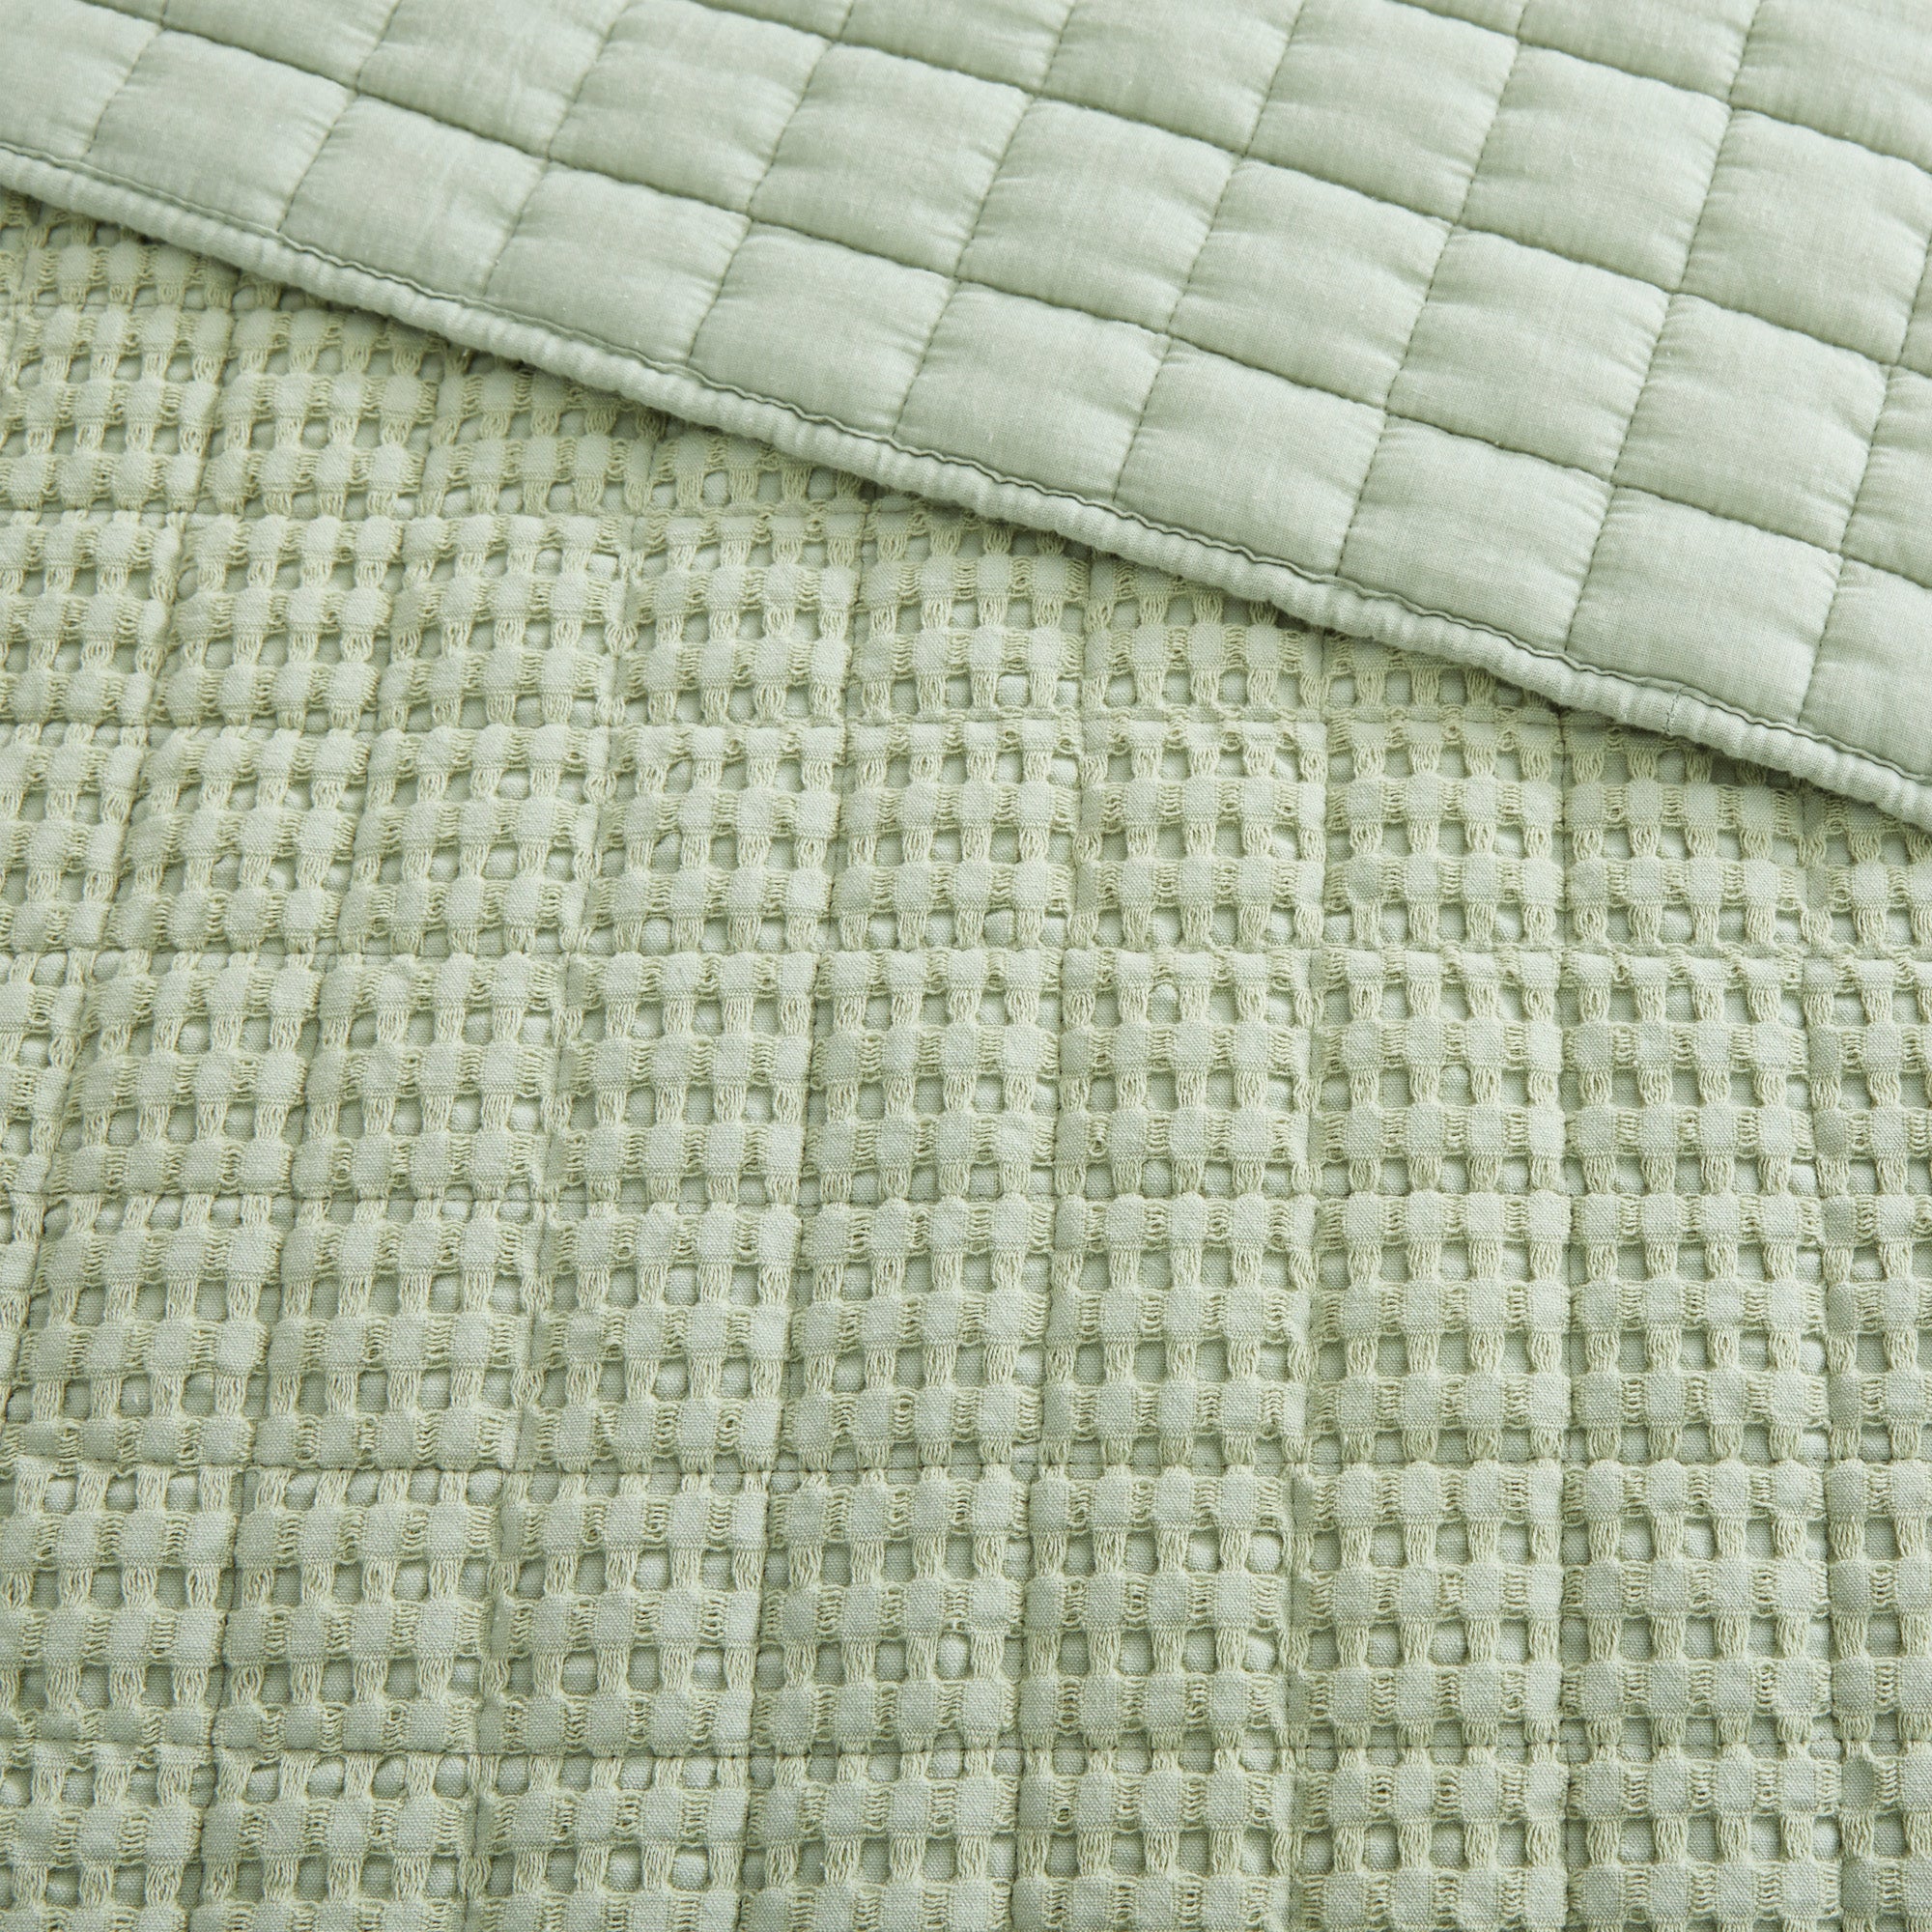 Mills Waffle Quilted Throw